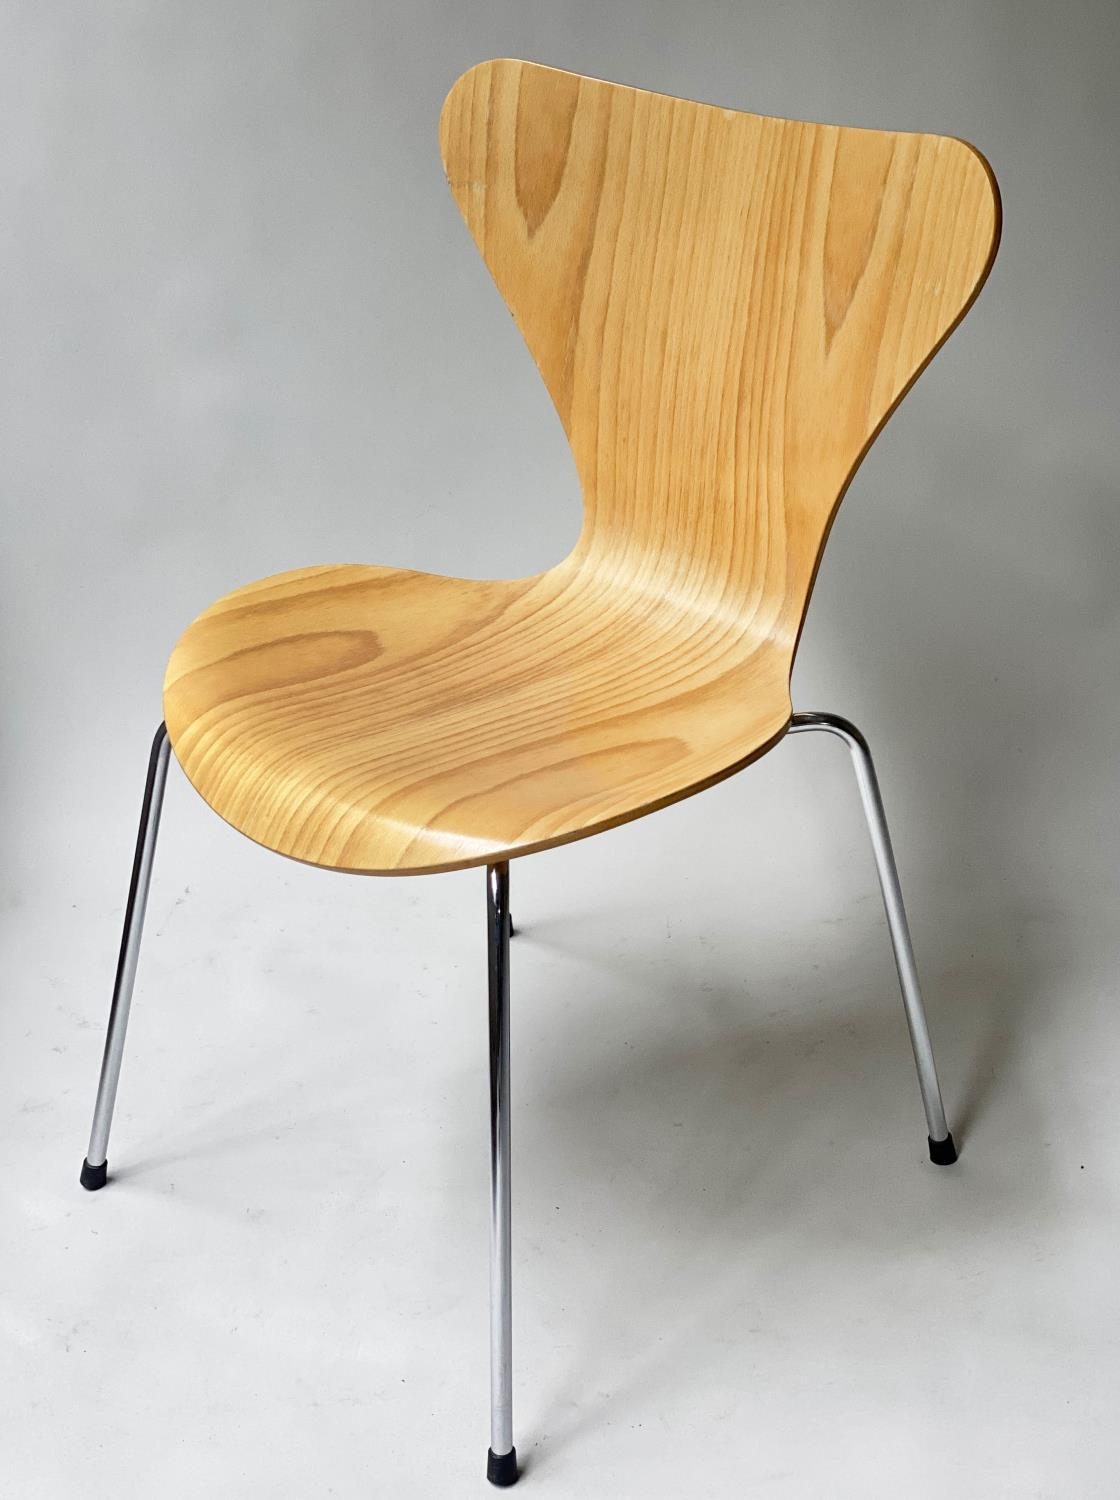 FRITZ HANSEN SERIES 7 DINING CHAIRS, a set of six, by Arne Jacobsen, bentwood and stacking ( - Image 5 of 7